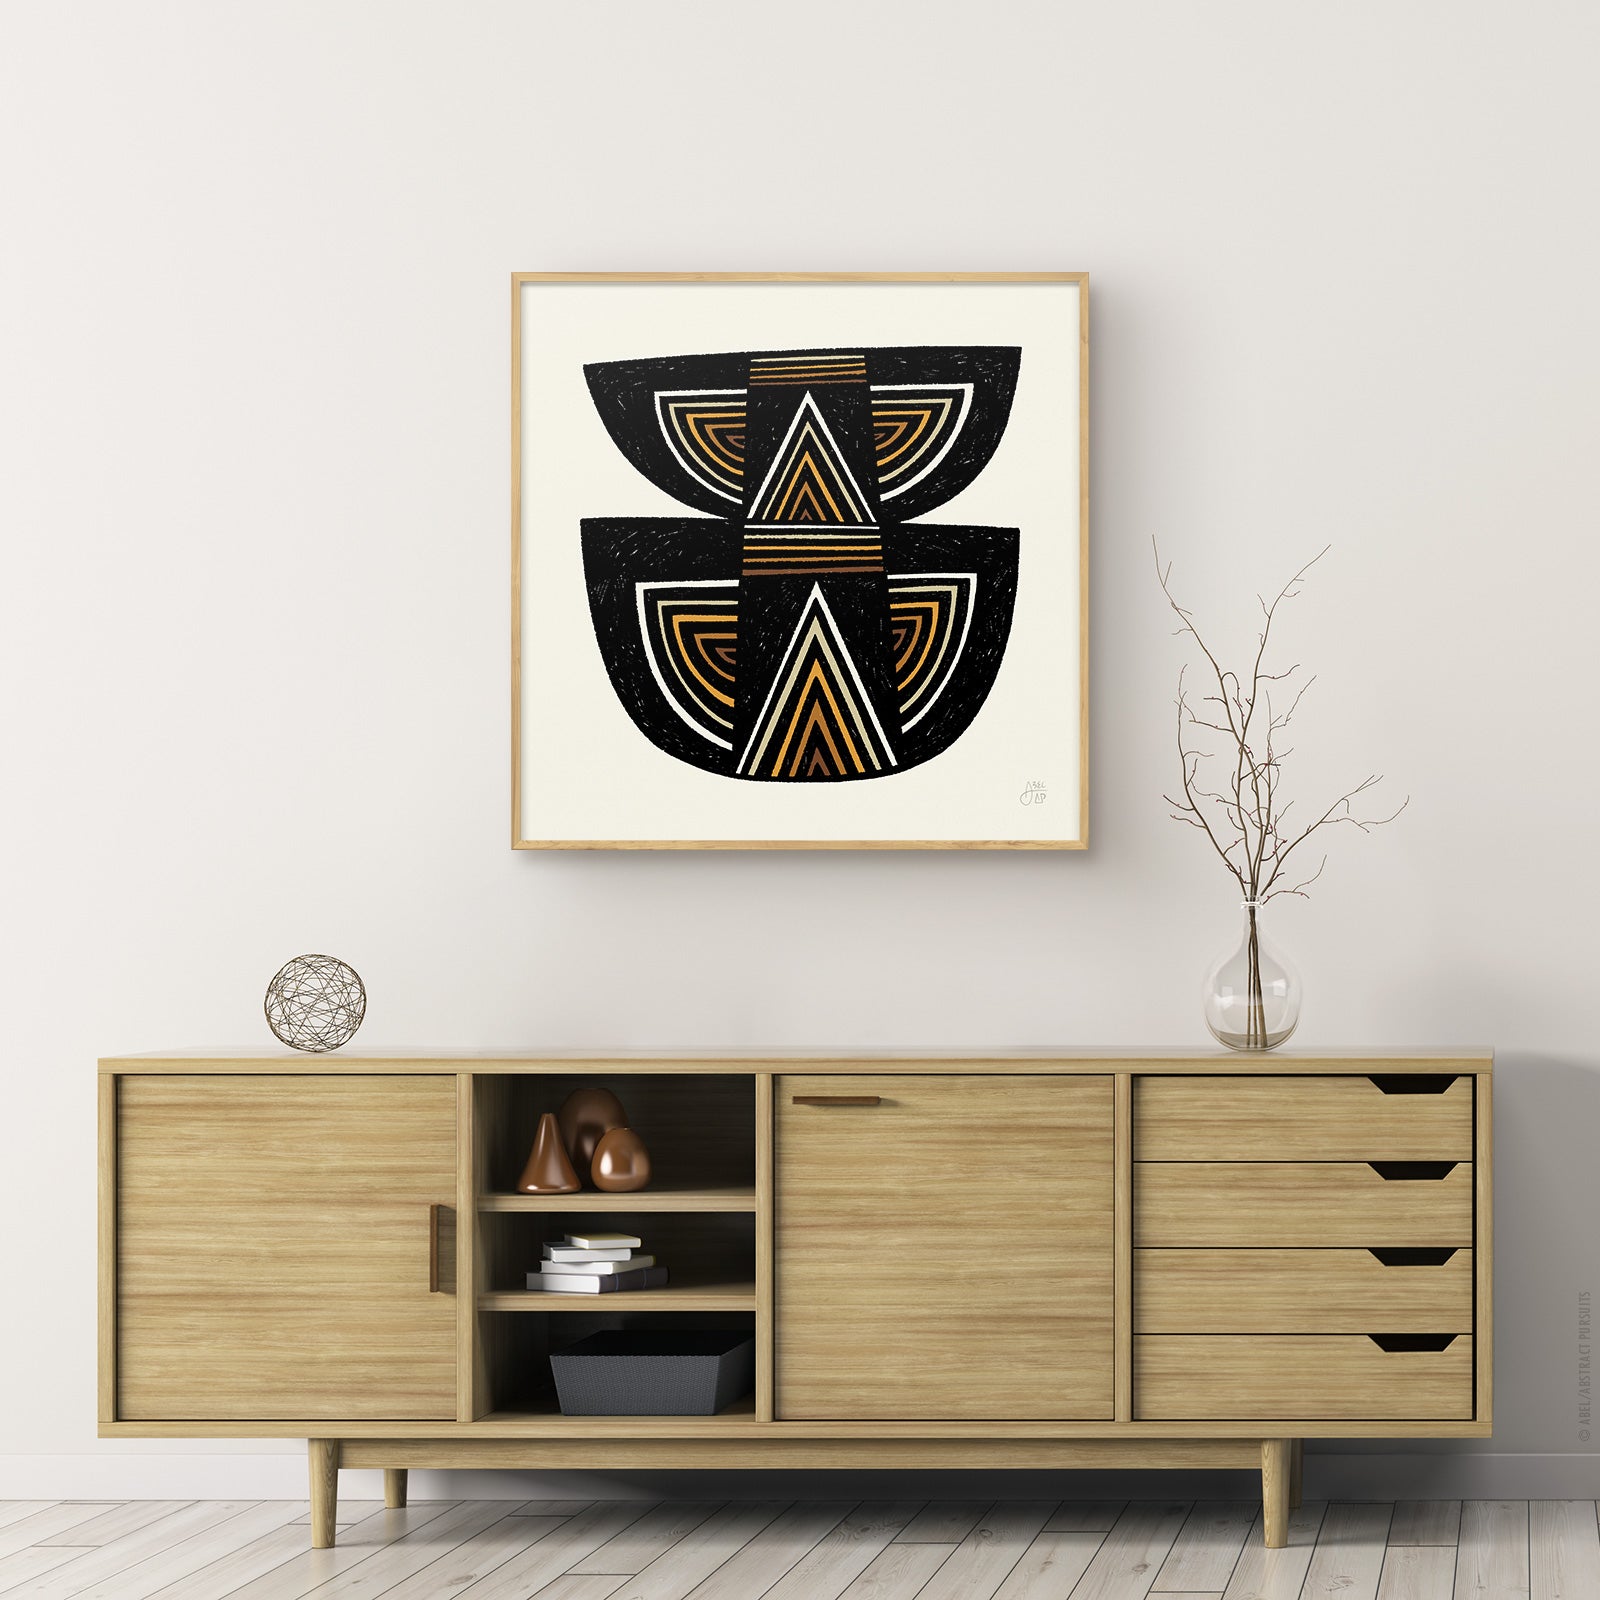 Hickory framed earth-toned temple design. Art print on bamboo paper by Erik Abel